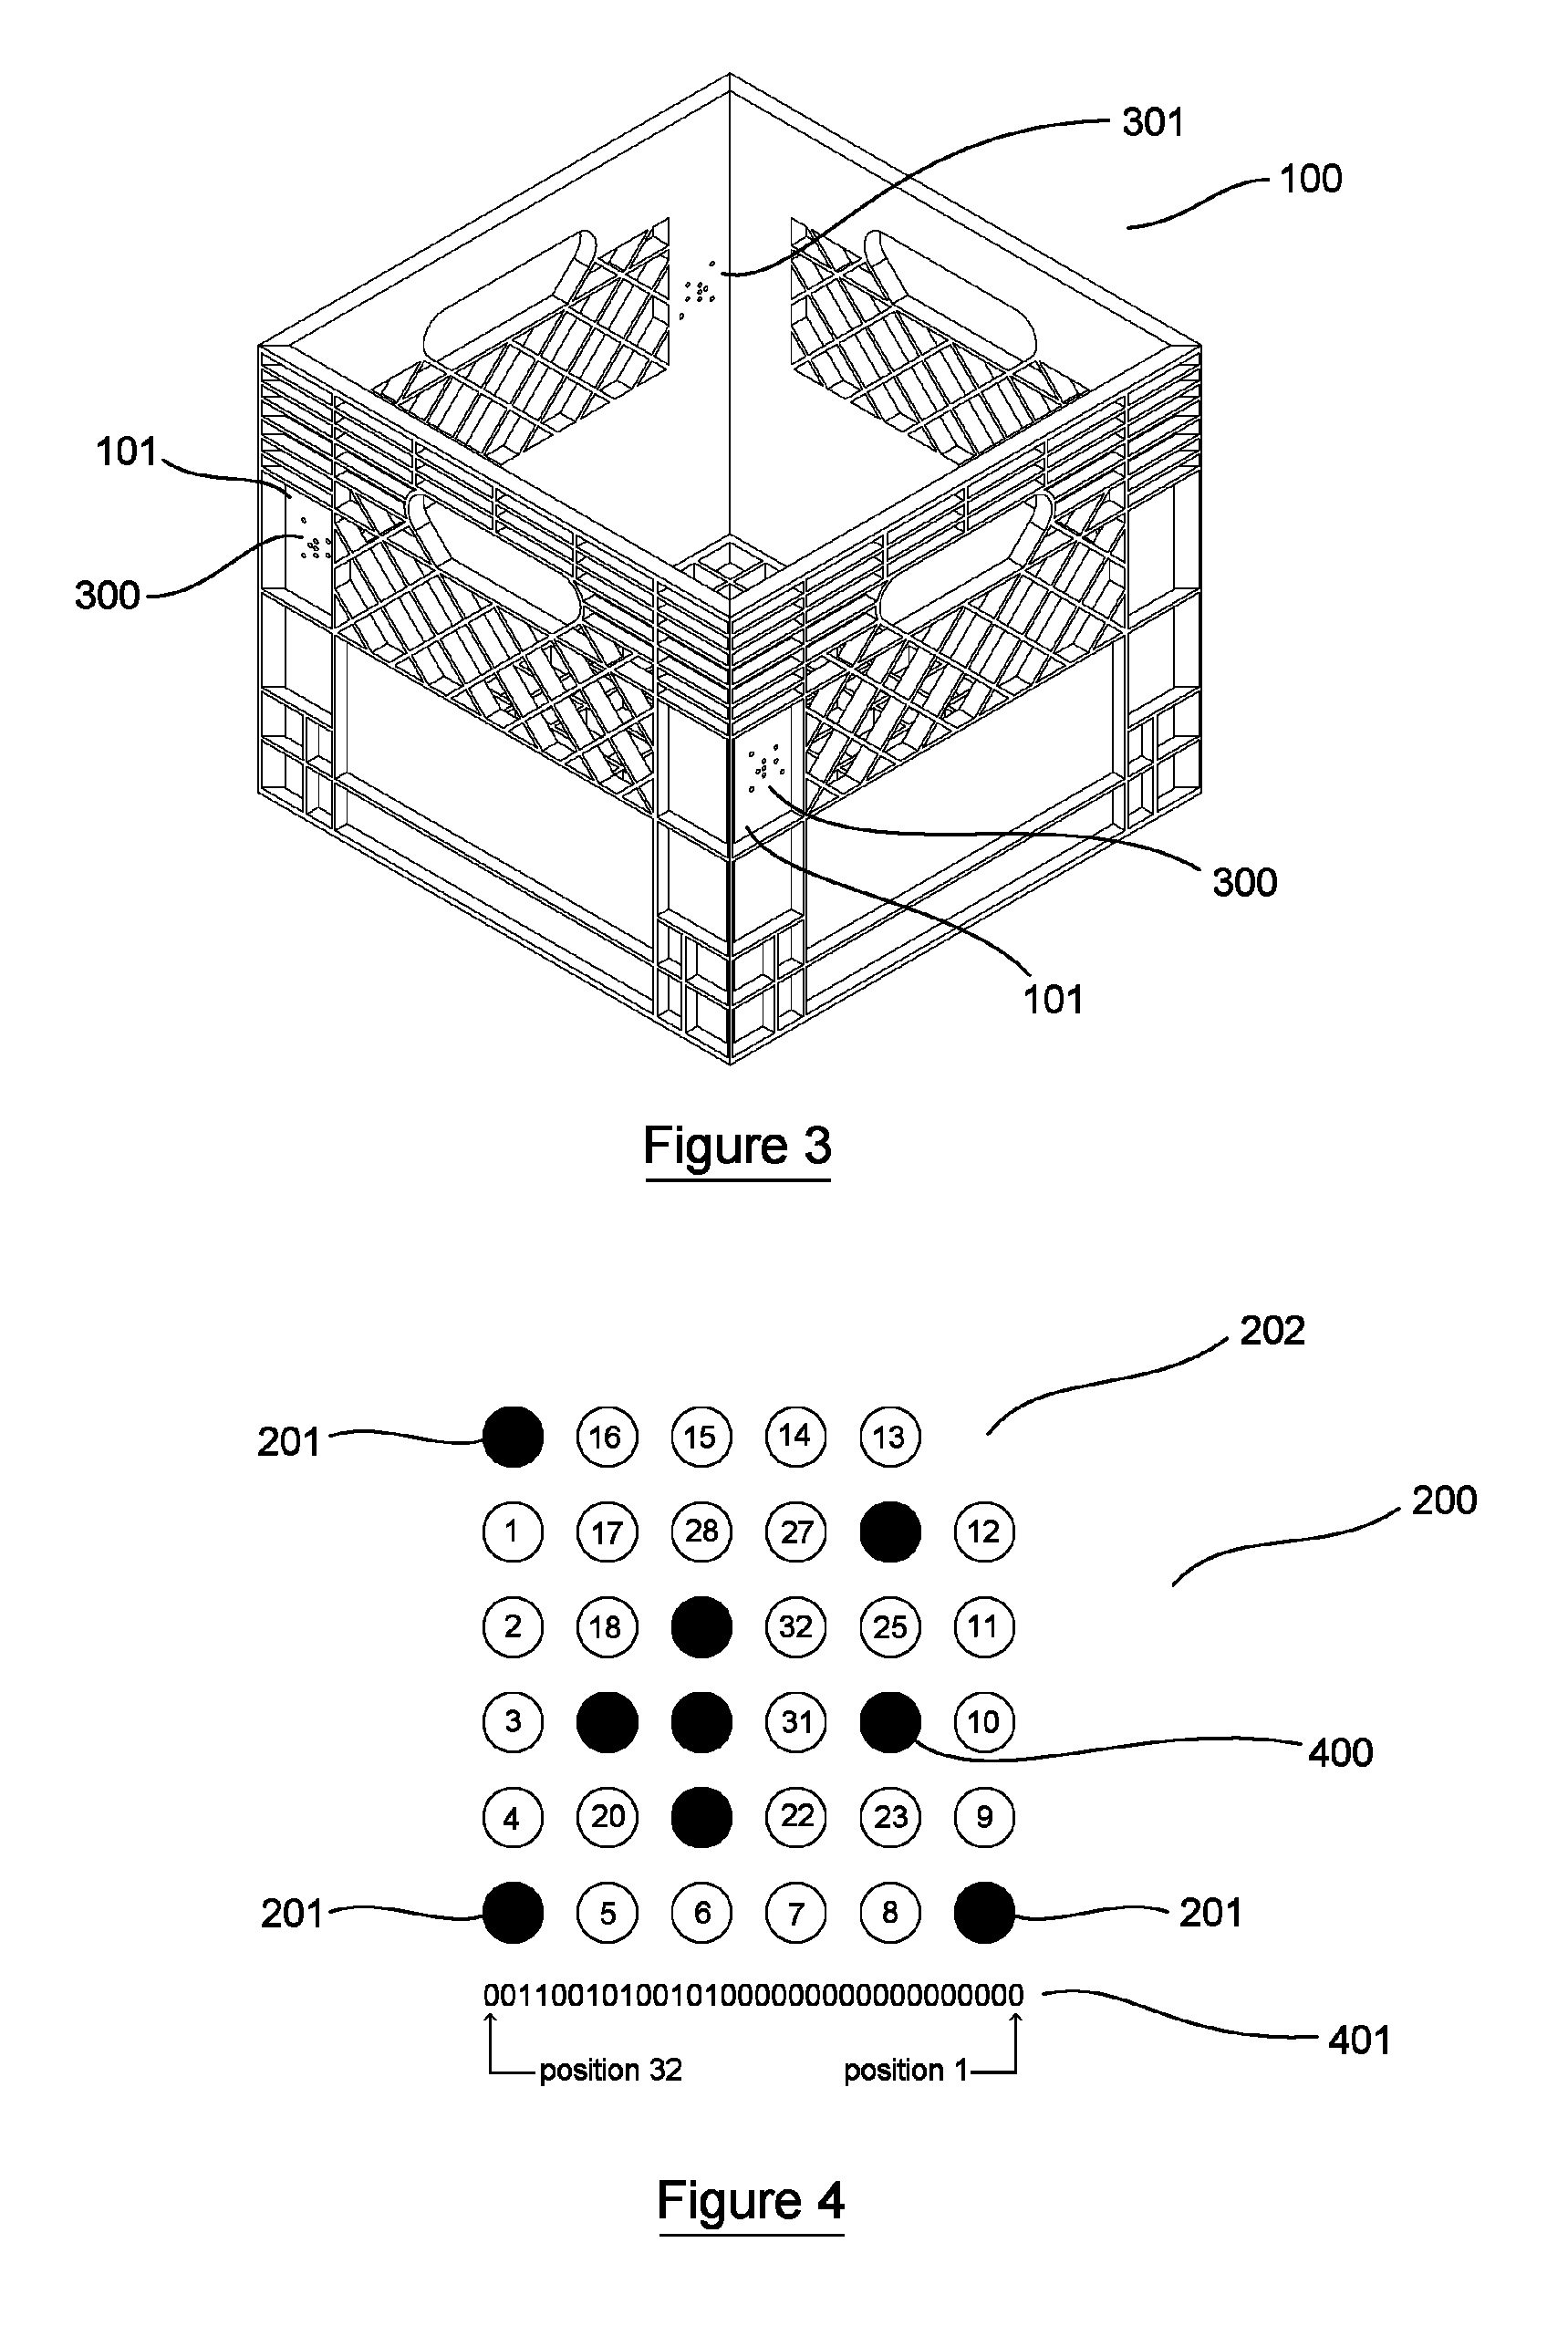 Method and system for identifying and tracking reusable packing crates